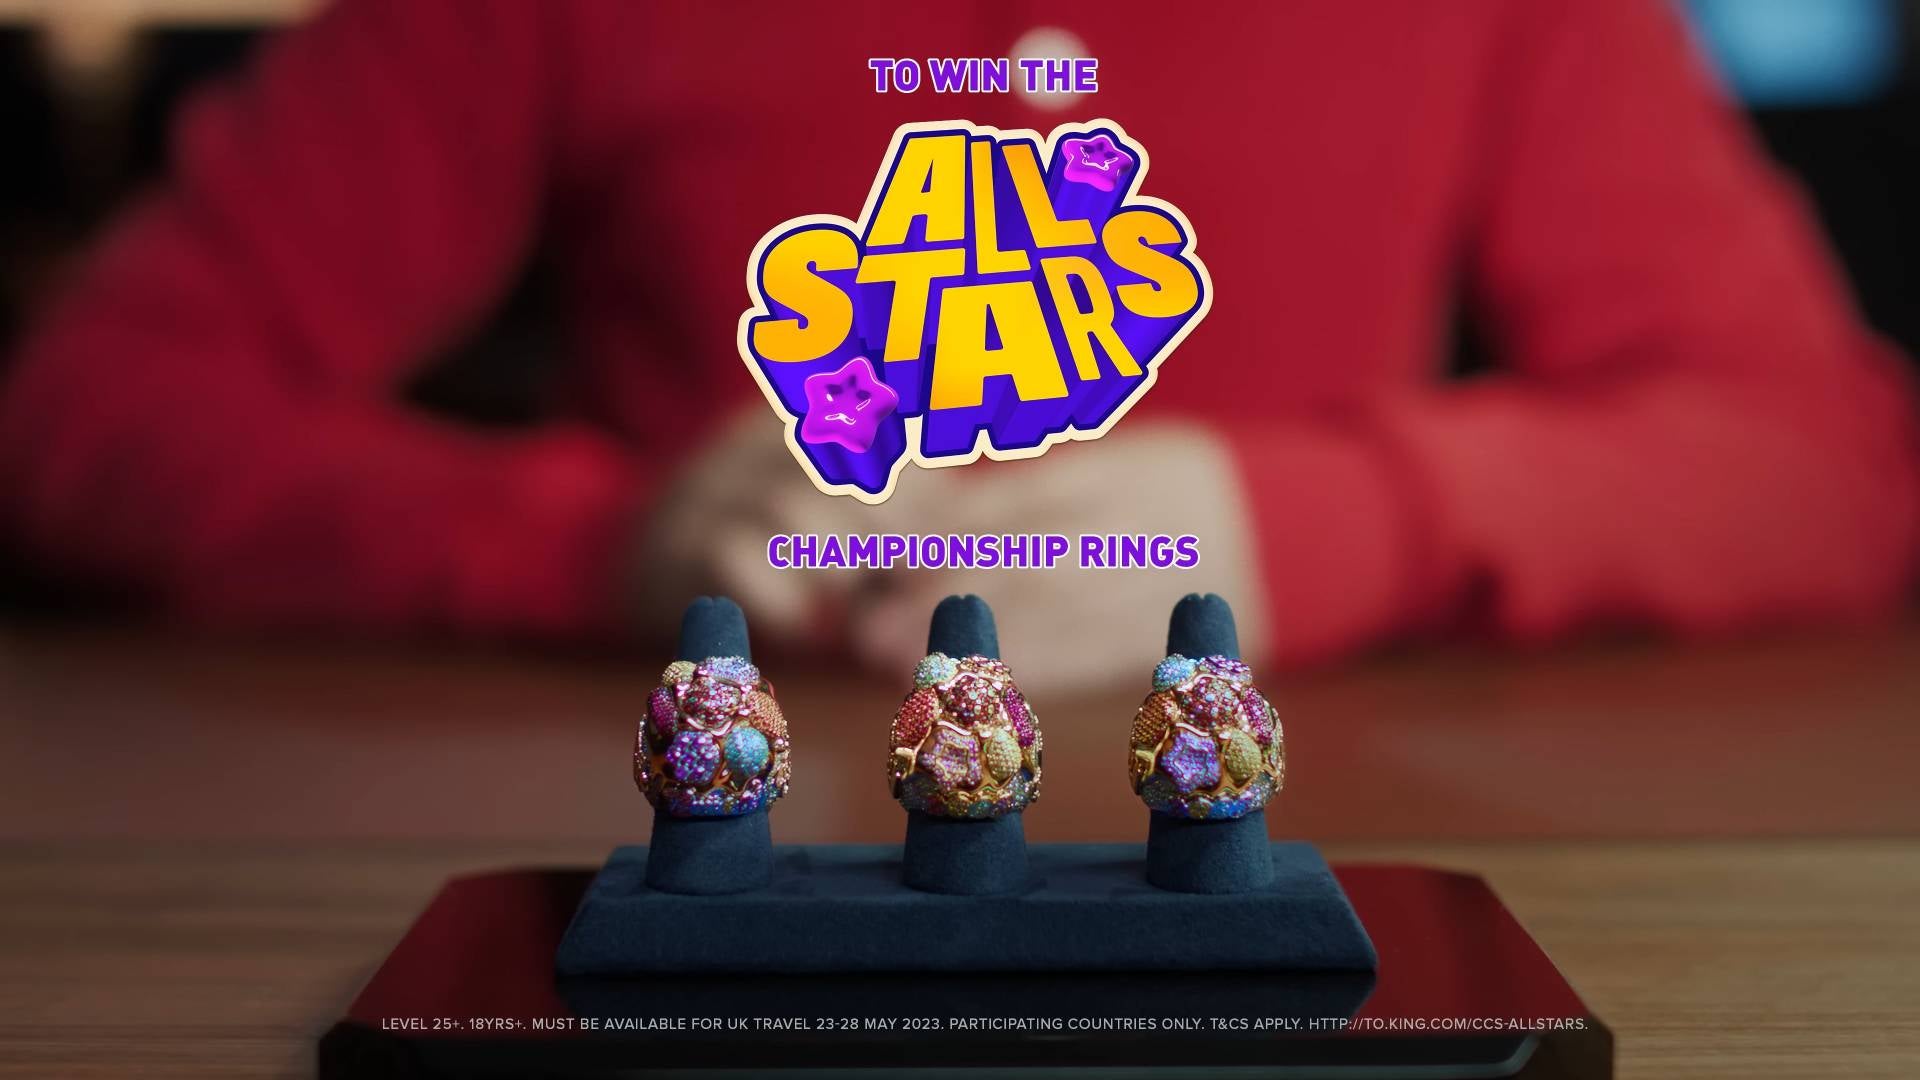 The All Stars announce which candy rings competitors can win in the tournament.